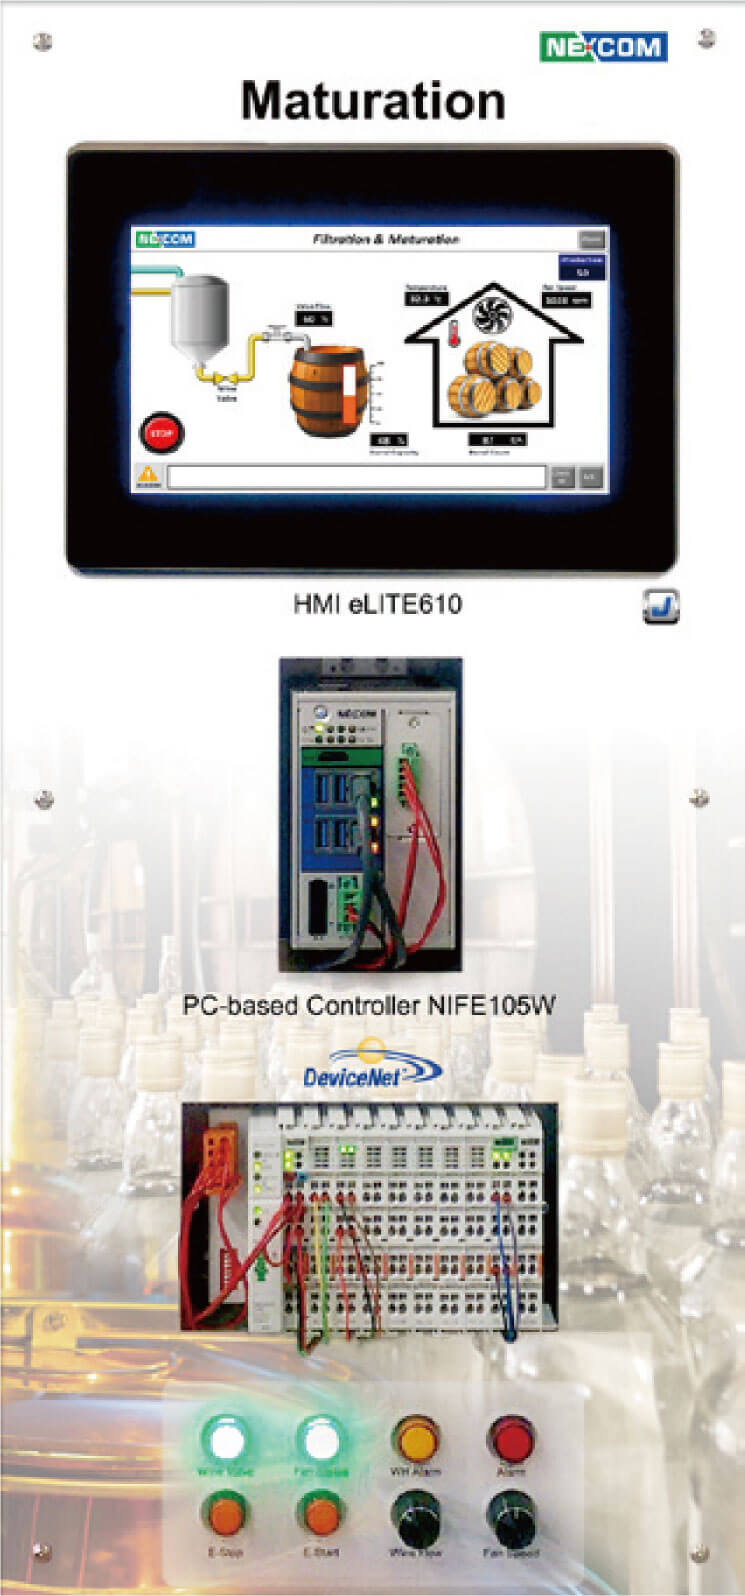 Multi-fieldbus communication PC-based controller with CODESYS RTE HMI with JMobile runtime included Scenario for whisky process simulation with 4 indicators, 2 push button and 2 knobs